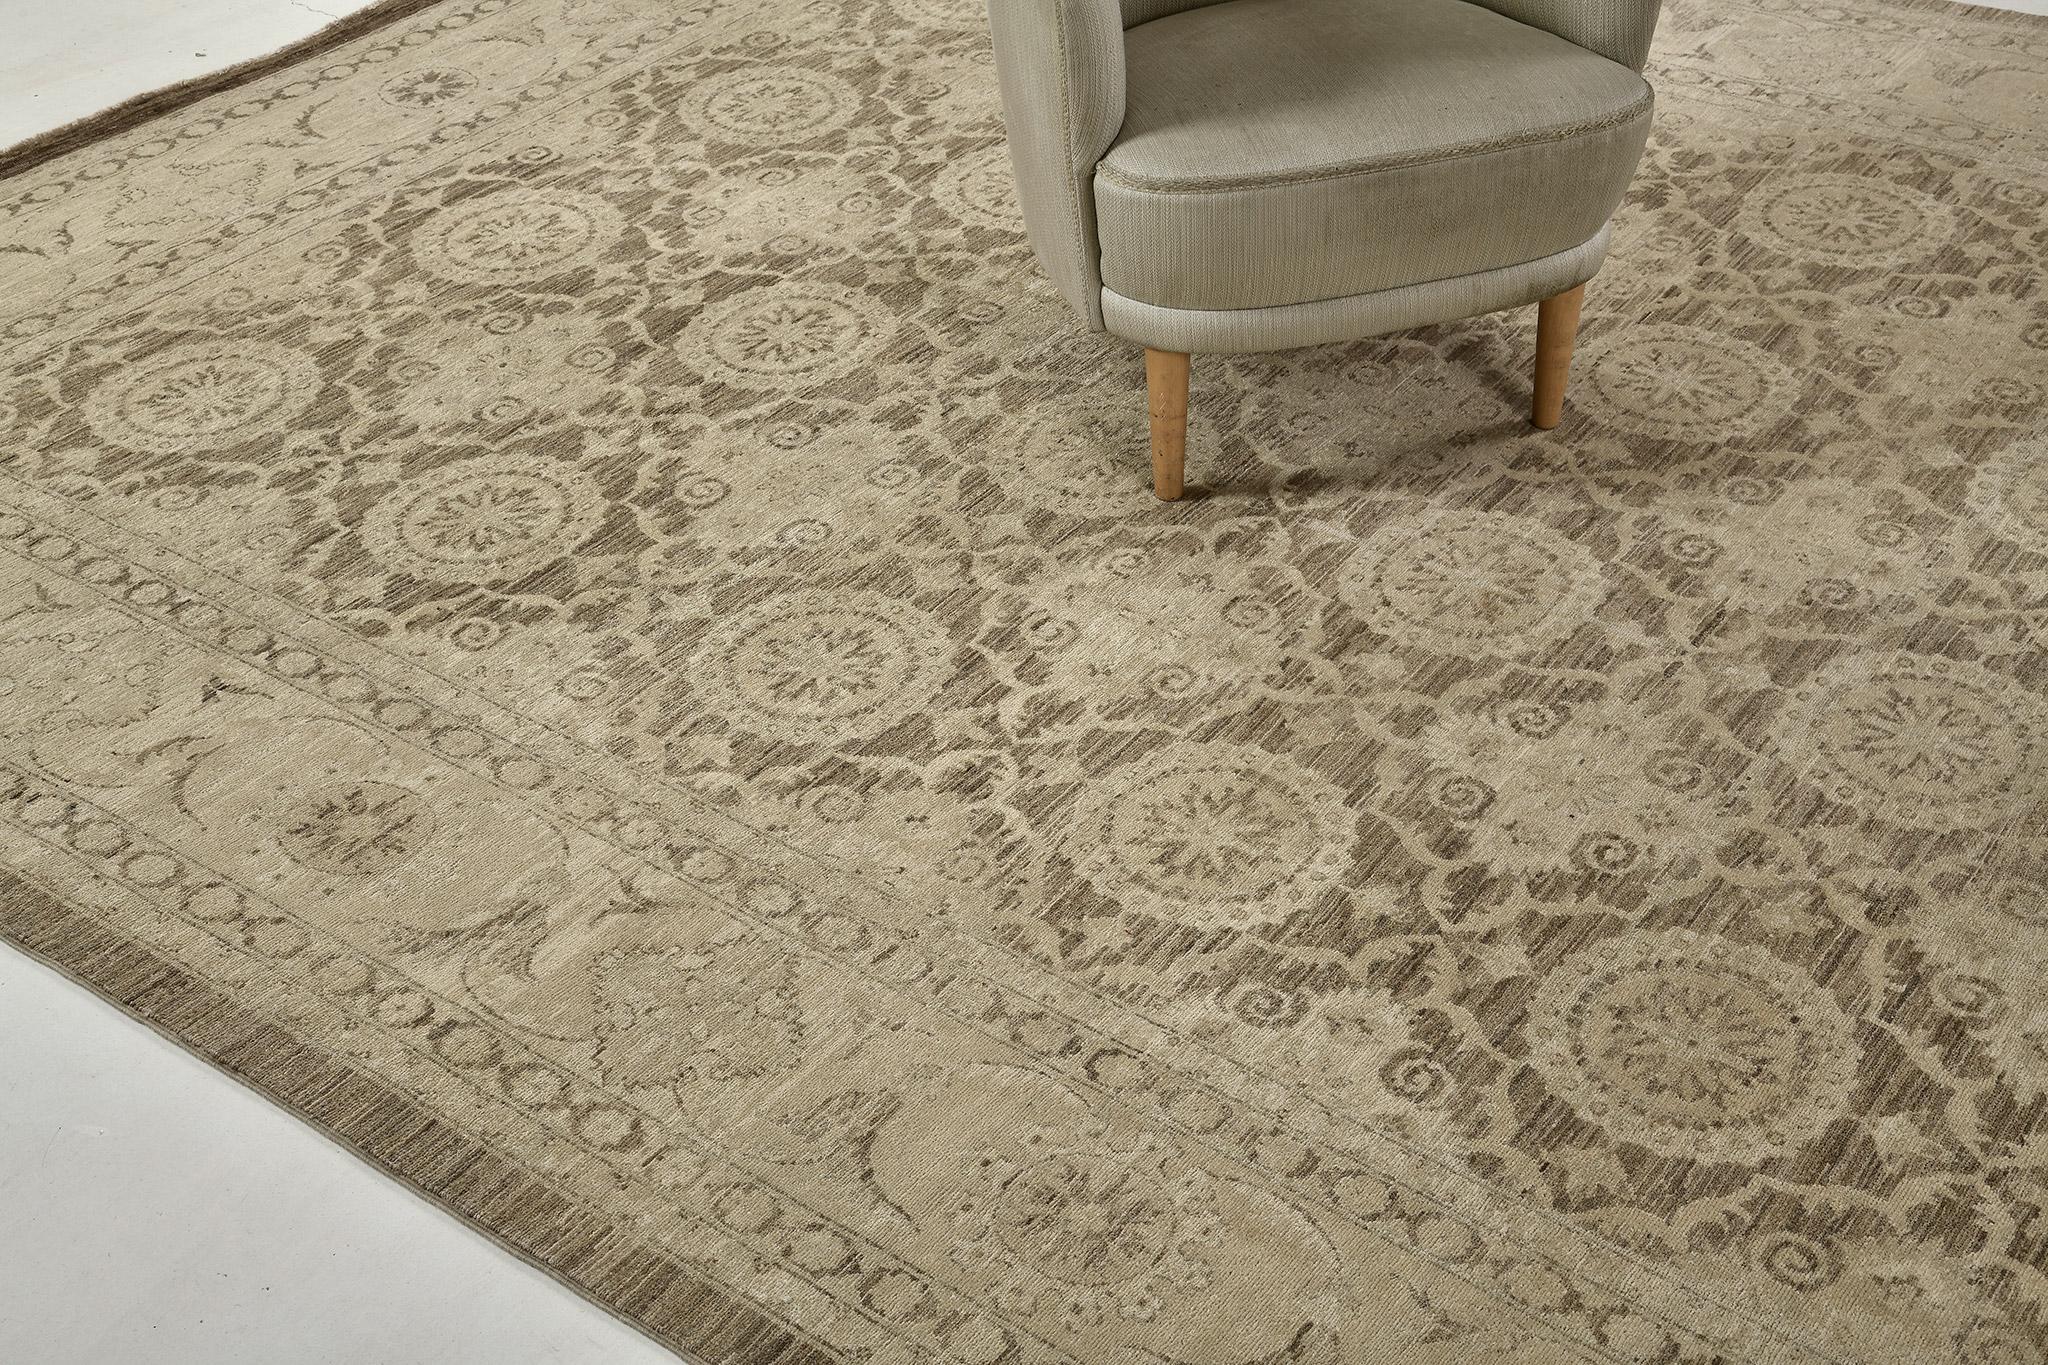 A sophisticated revival of Tabriz rug in Rapture Collection that elegantly establishes superior intricacy through an allover pattern of ornate emblems connected by graceful vines. Flanked by inner and outer floral guard bands, this classy rug is in